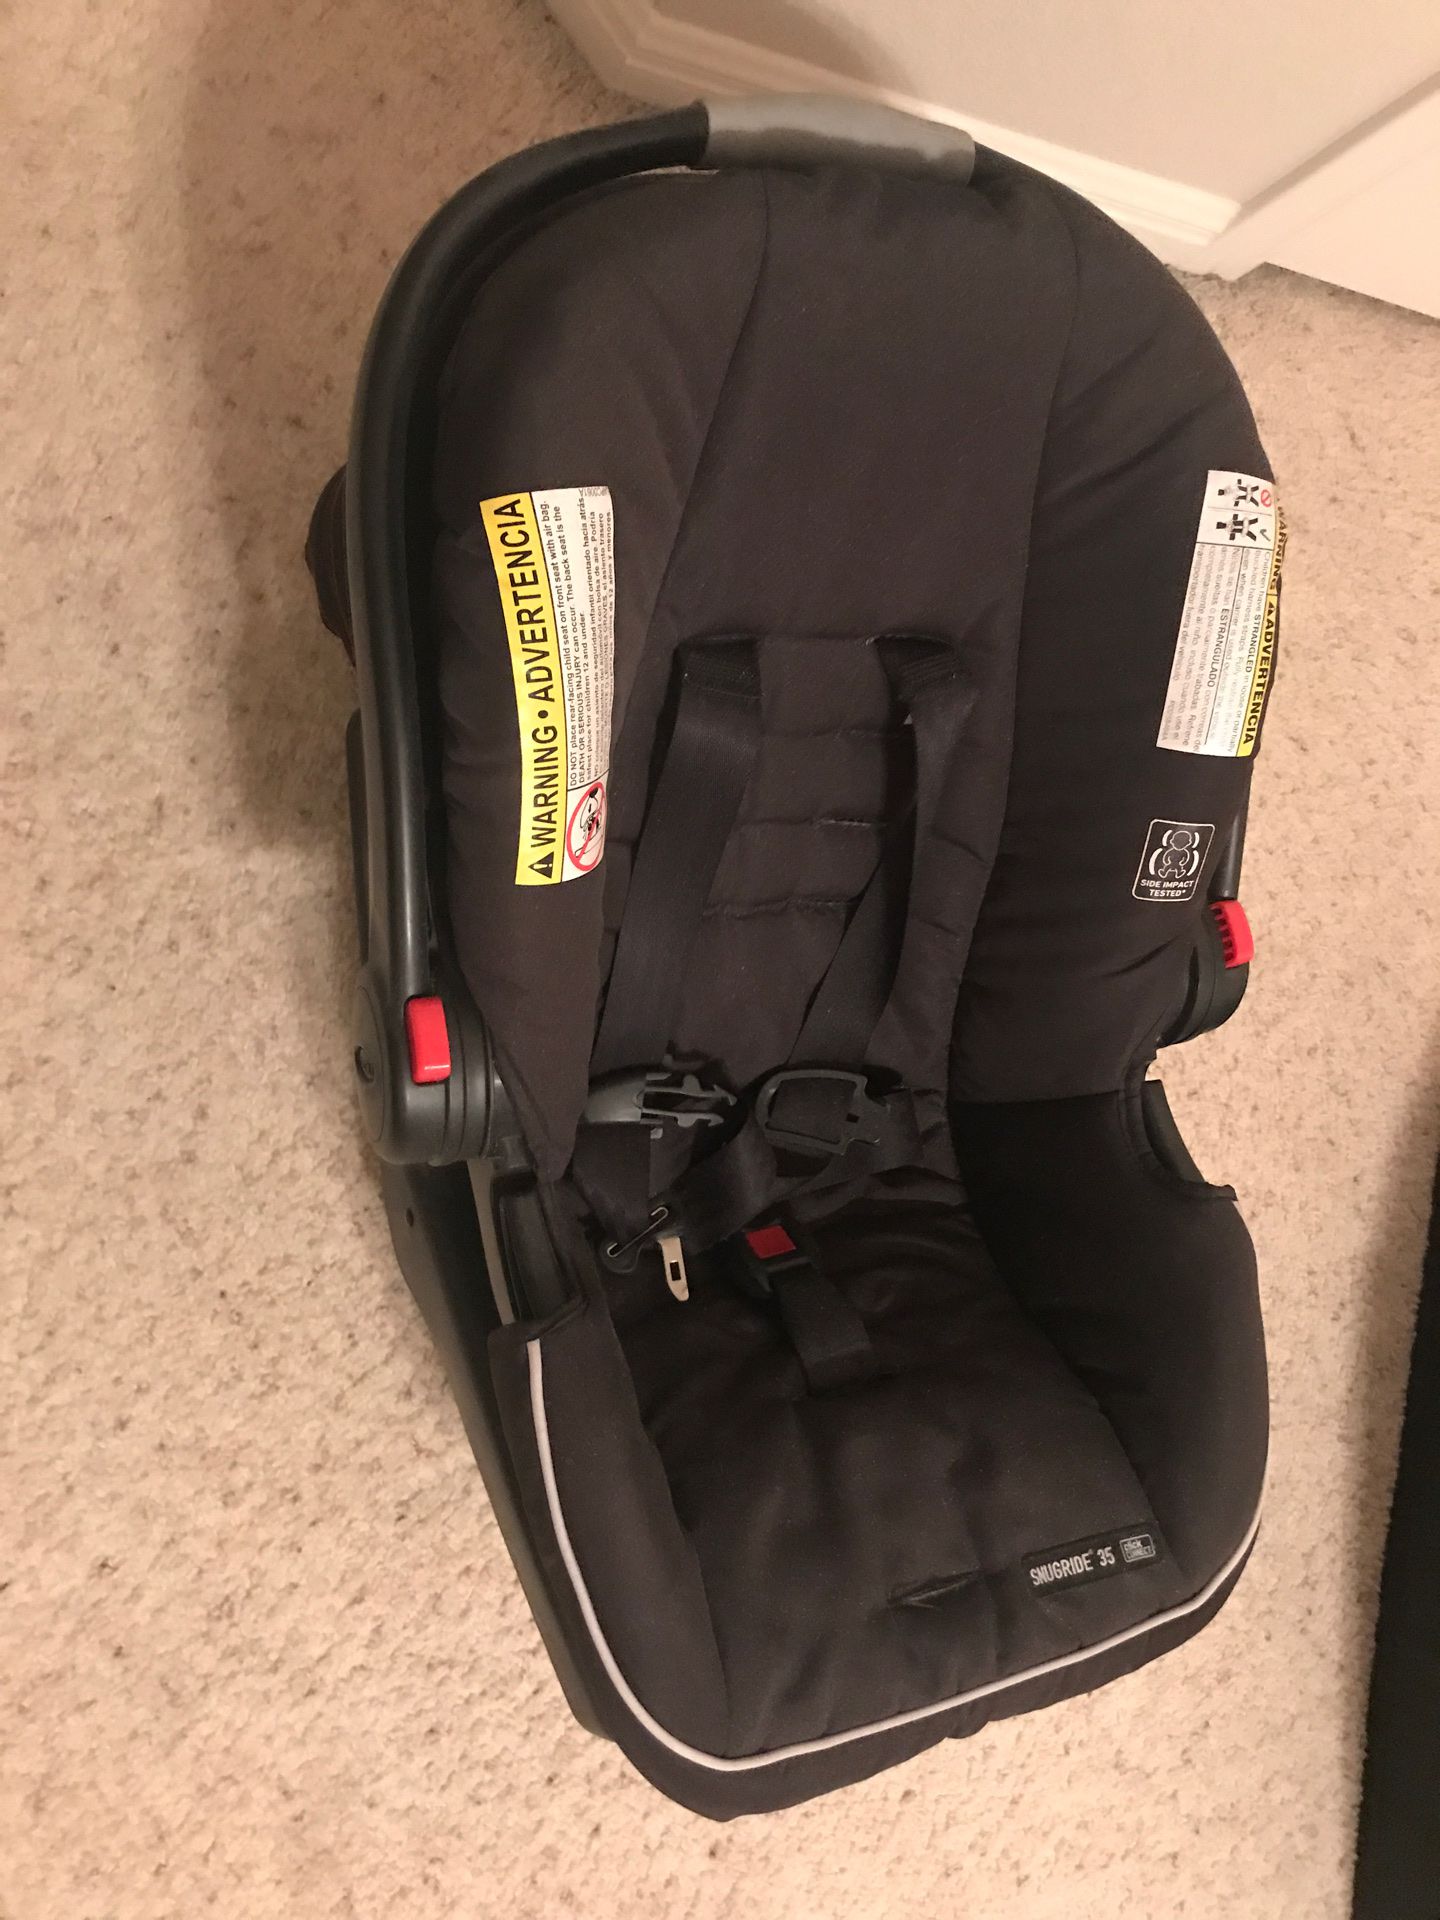 Graco car seat snugride 35 with car base